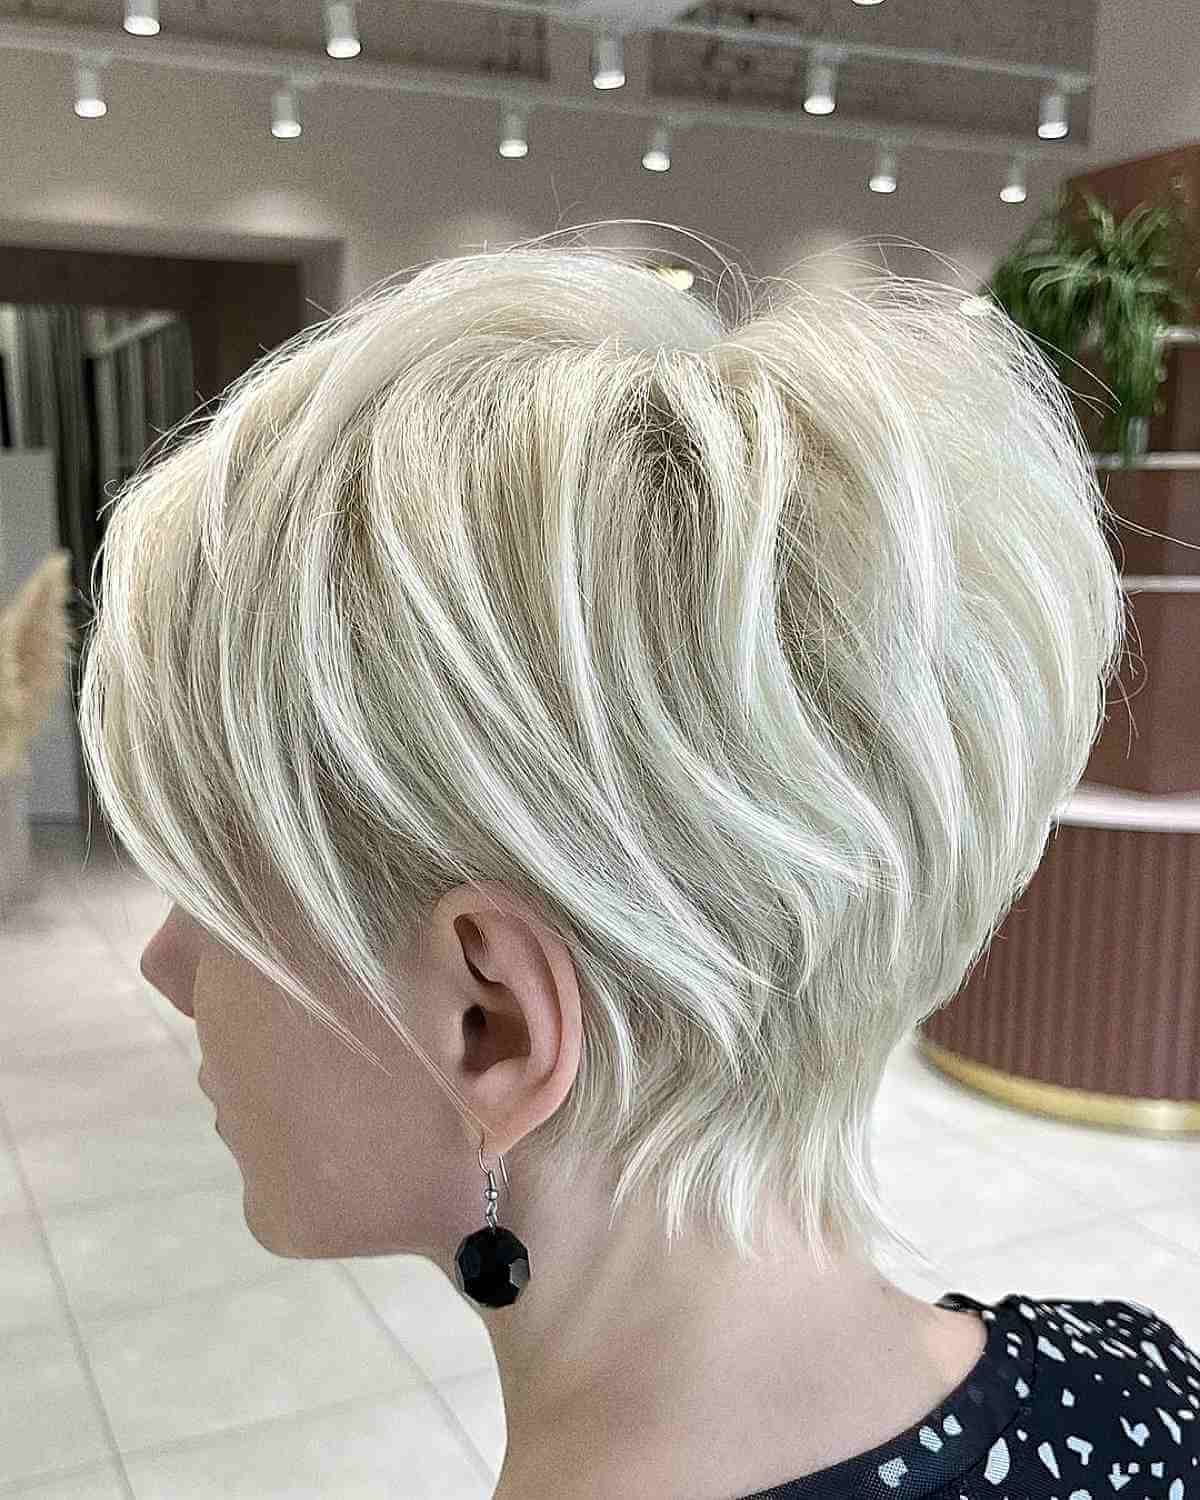 The 34 Cutest Pixie Bob Haircut Ideas Ever With Regard To Layered Messy Pixie Bob Hairstyles (View 4 of 25)